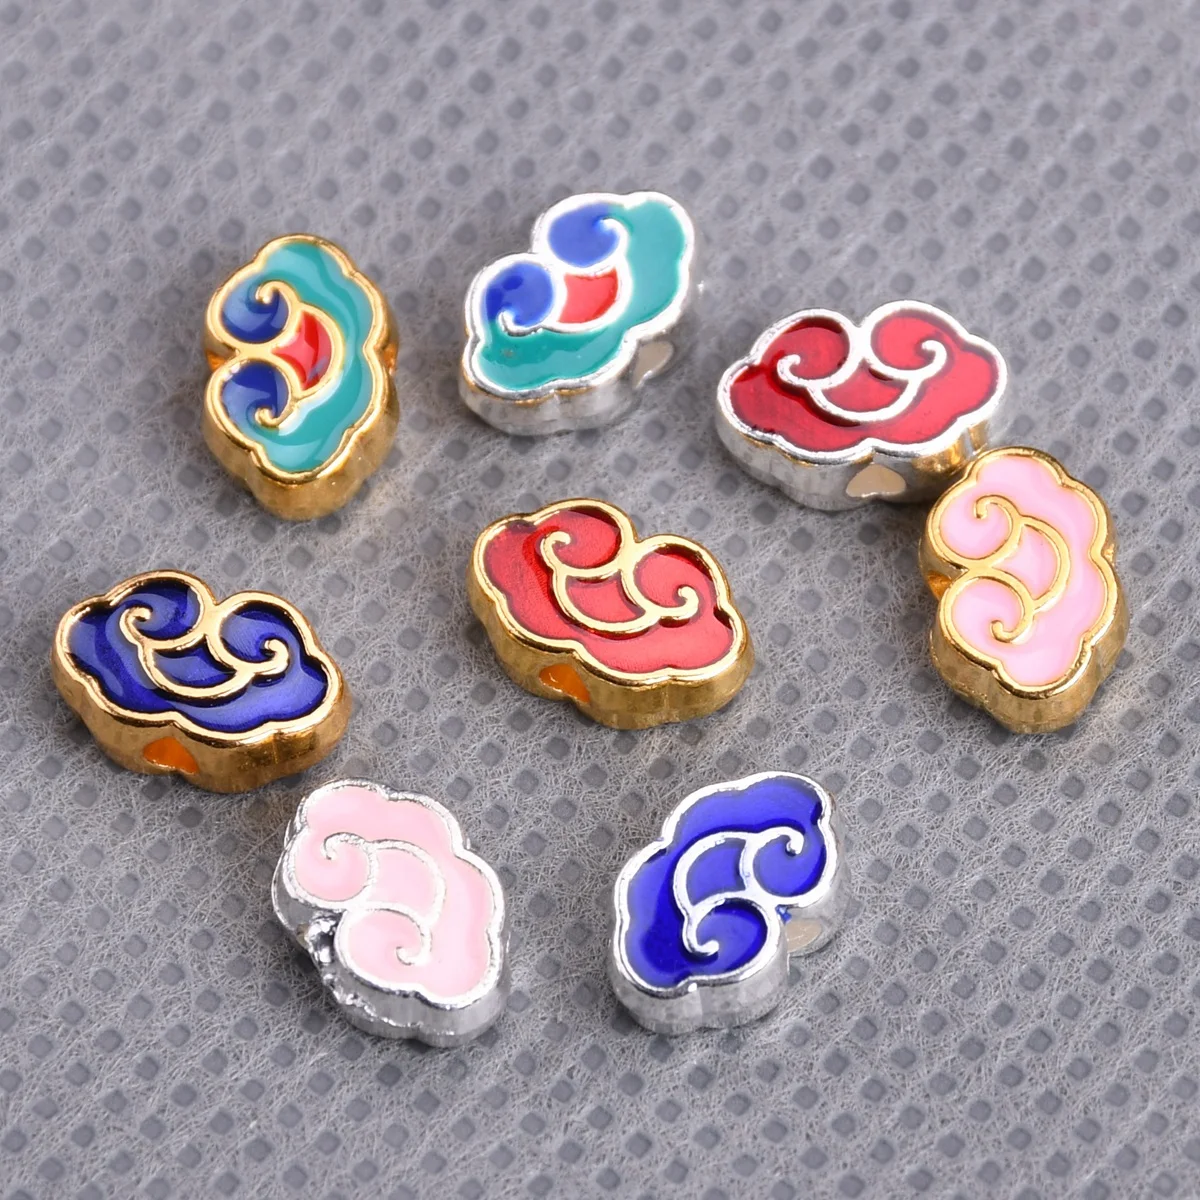 10pcs Enamel Metal 9.5x6.2mm Chinese Propitious Cloud Shape Loose Craft Beads For Jewelry Making DIY Findings 10pcs pull out travel jewelry organizer box necklace earring bracelet brooches storage packaging craft paper drawer gift box